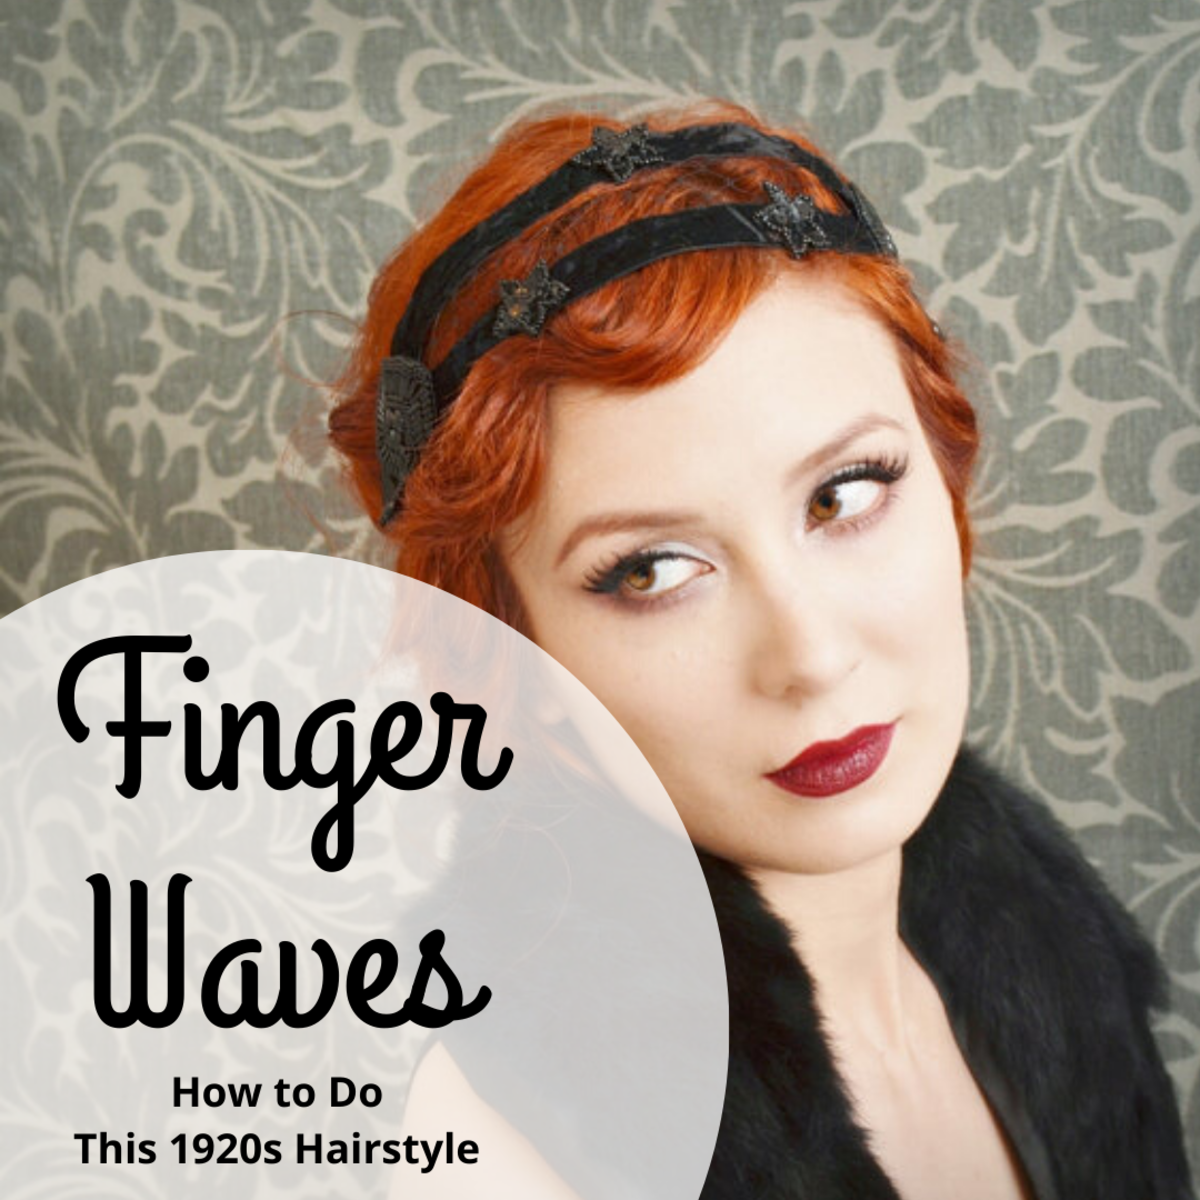 How to Do Finger Waves: A Curly Style for Long or Short Hair